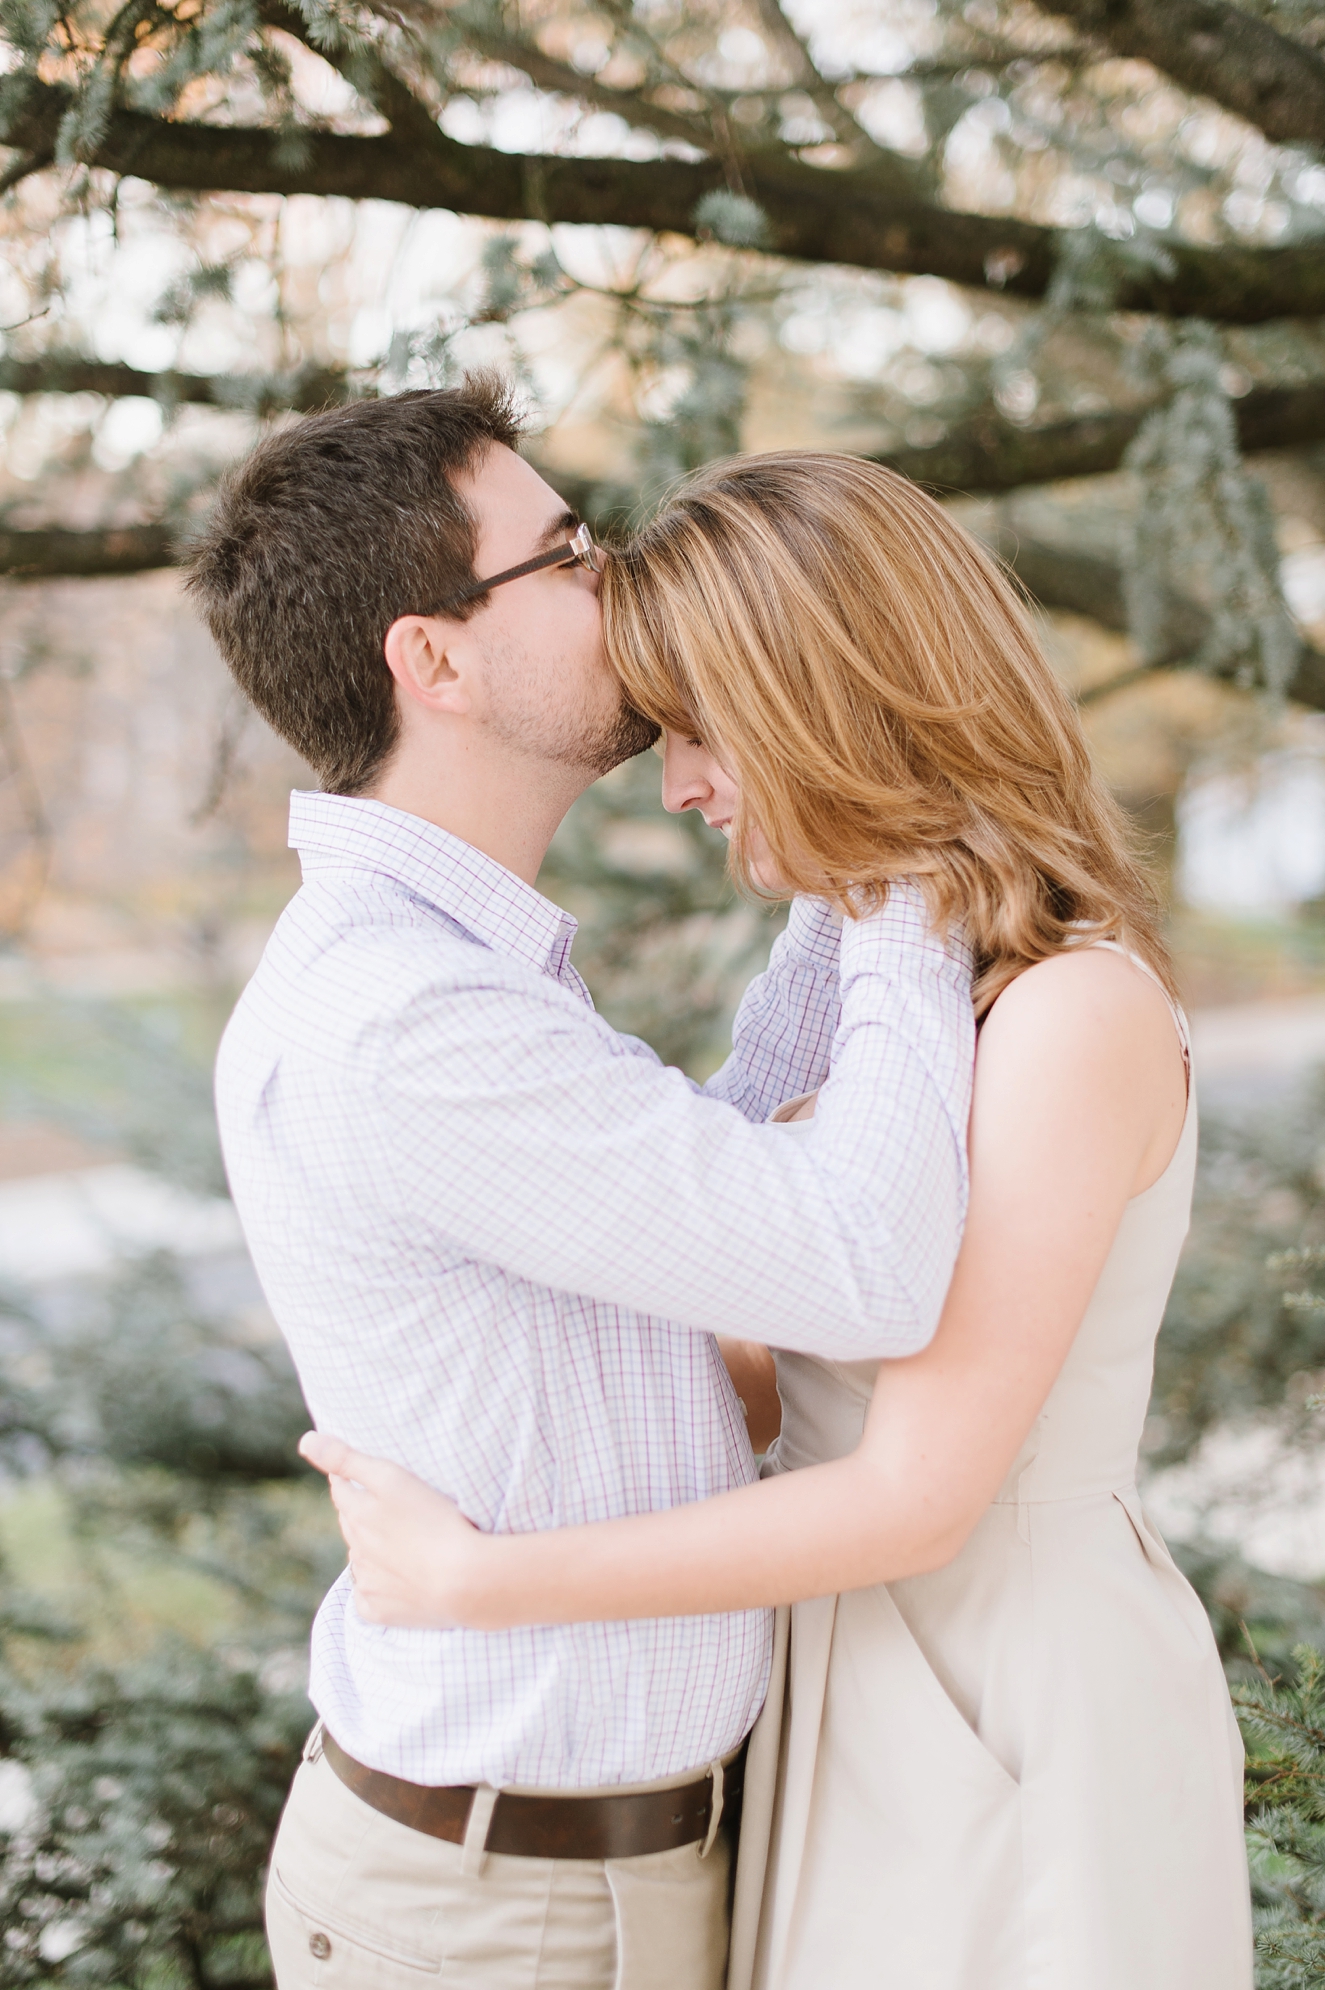 Autumn Farm Engagement Pictures at University of Maryland | Natalie Franke Photography